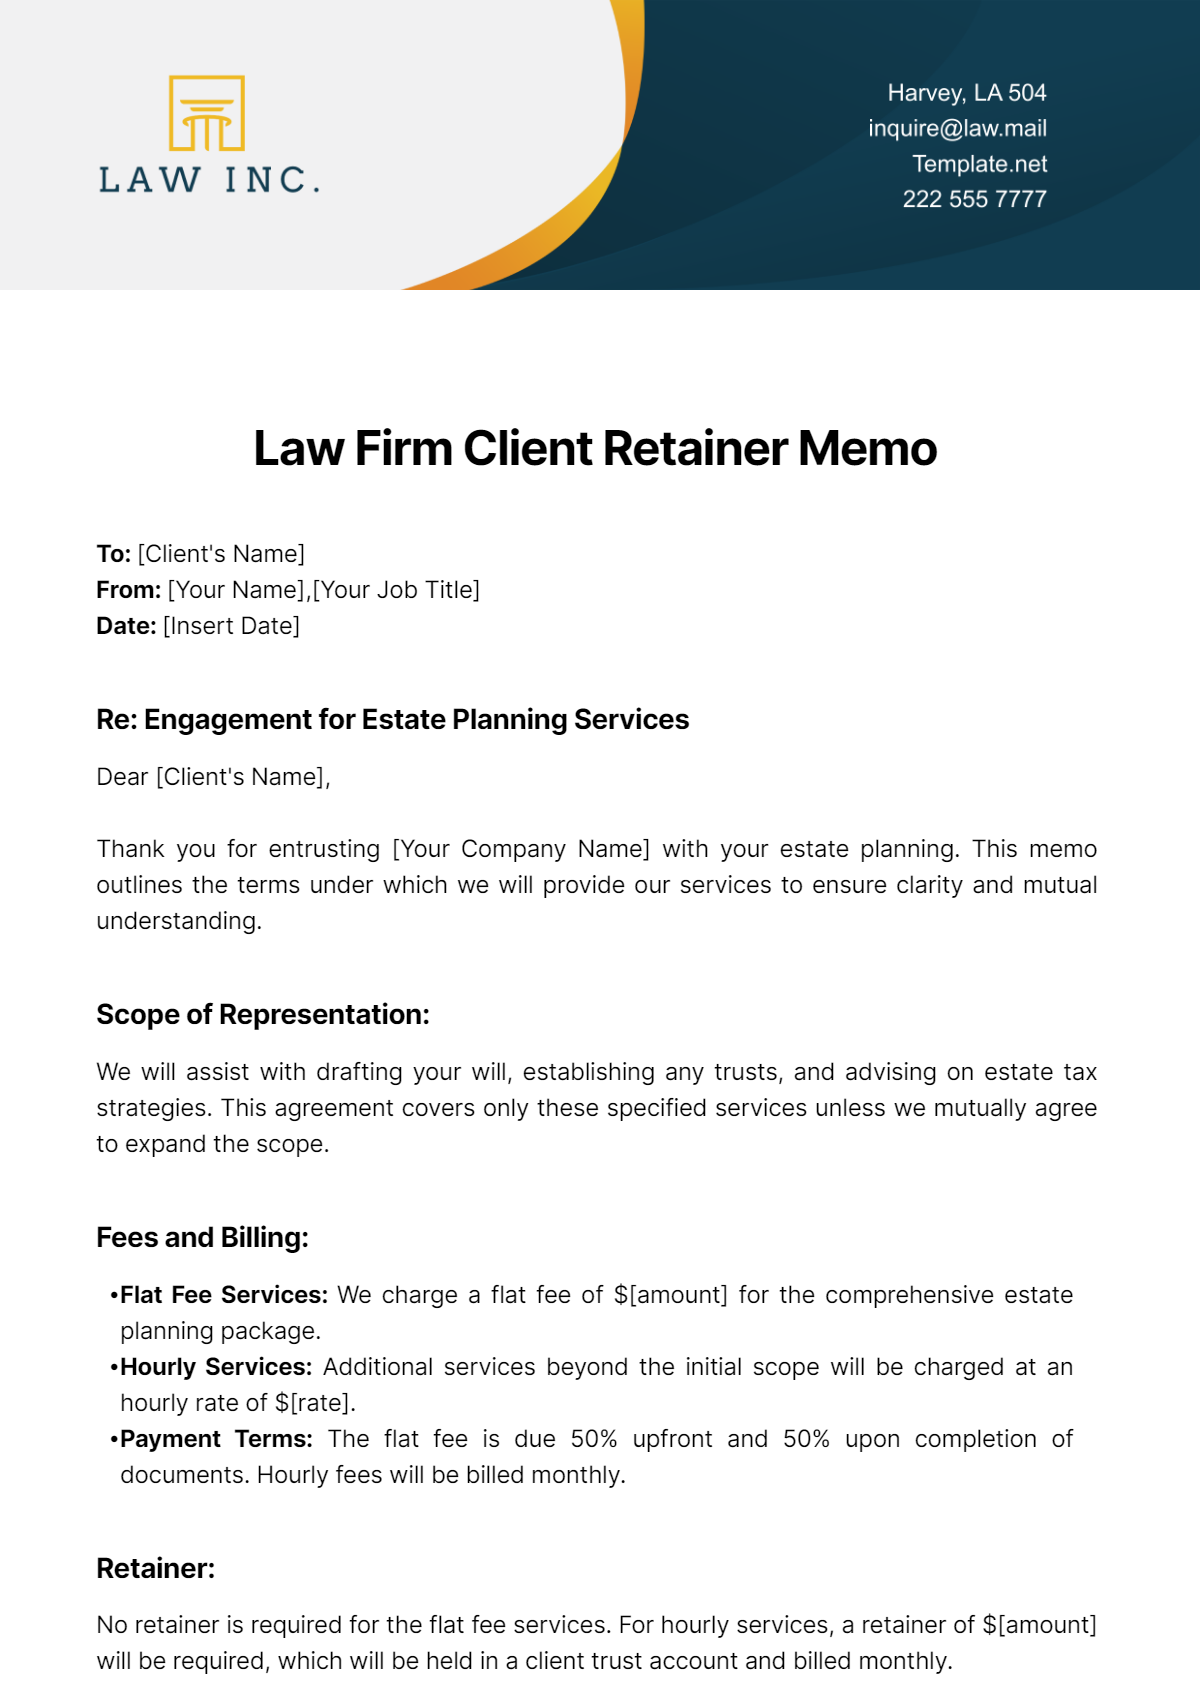 Free Law Firm Client Retainer Memo Template